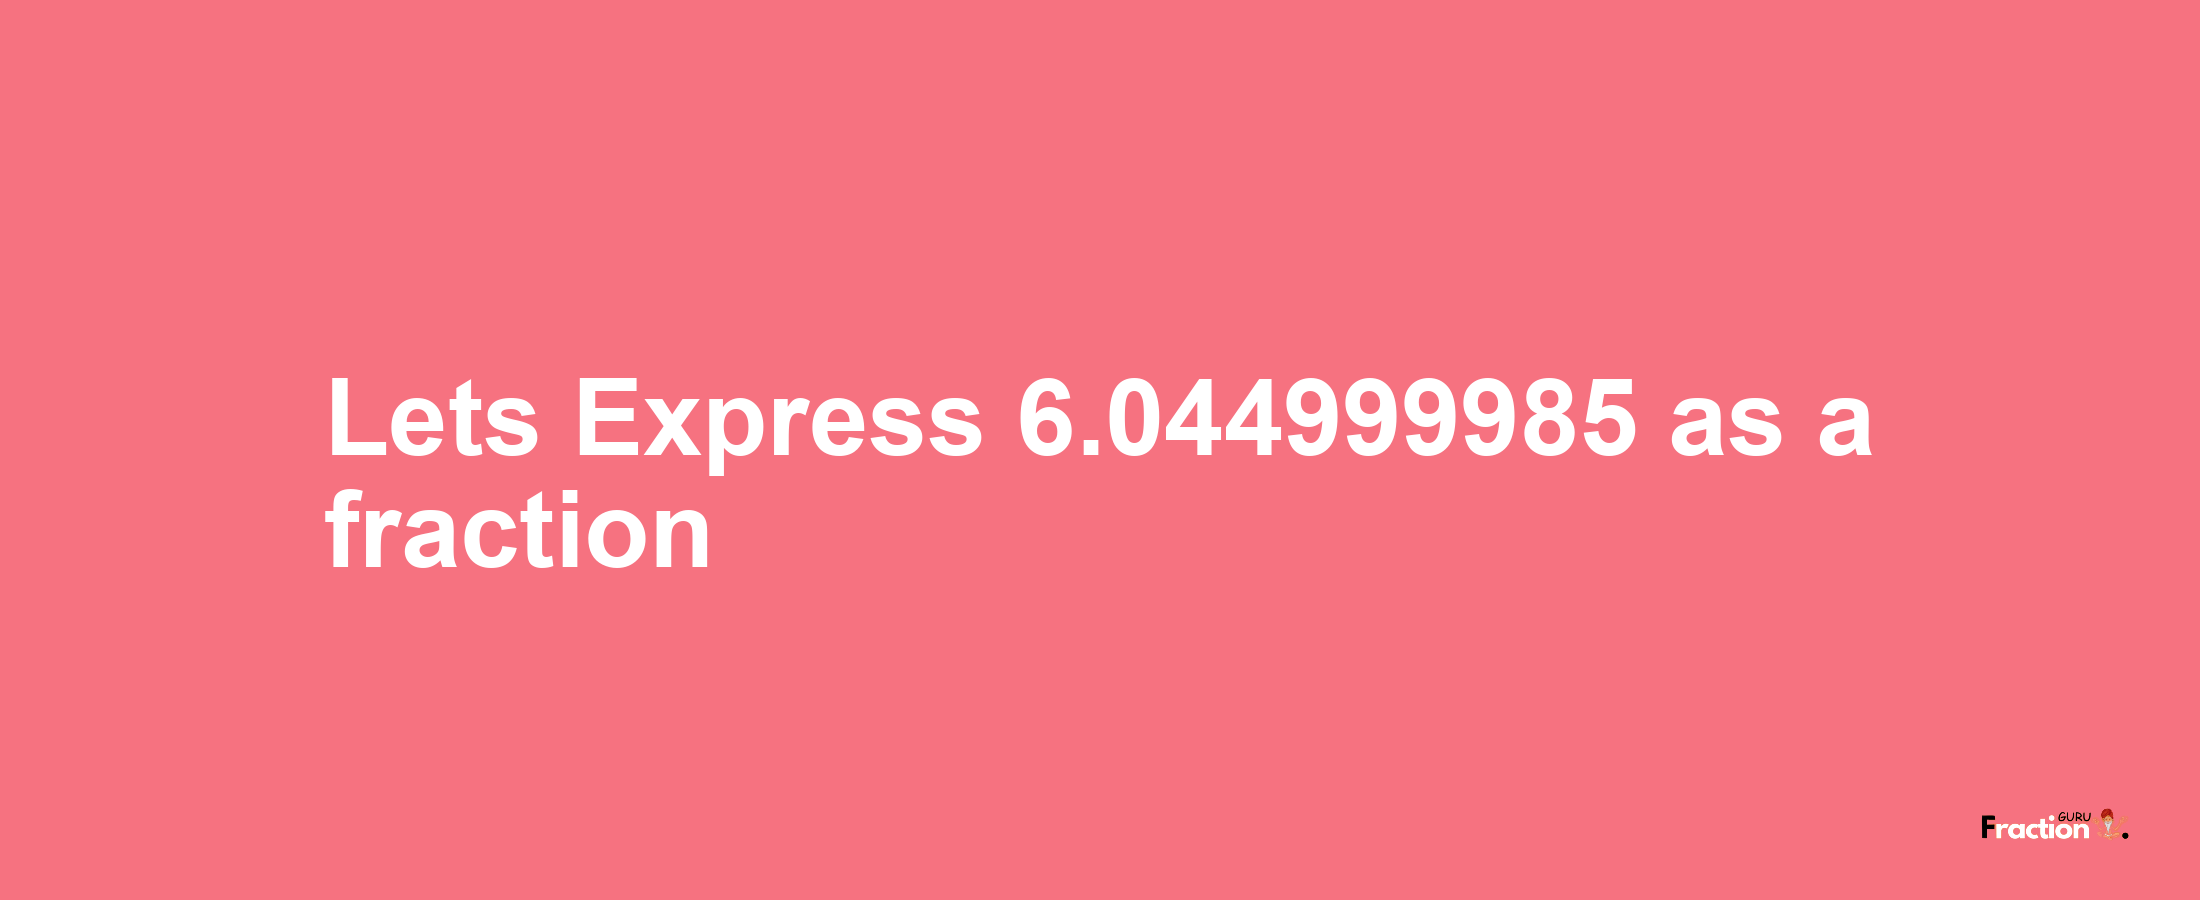 Lets Express 6.044999985 as afraction